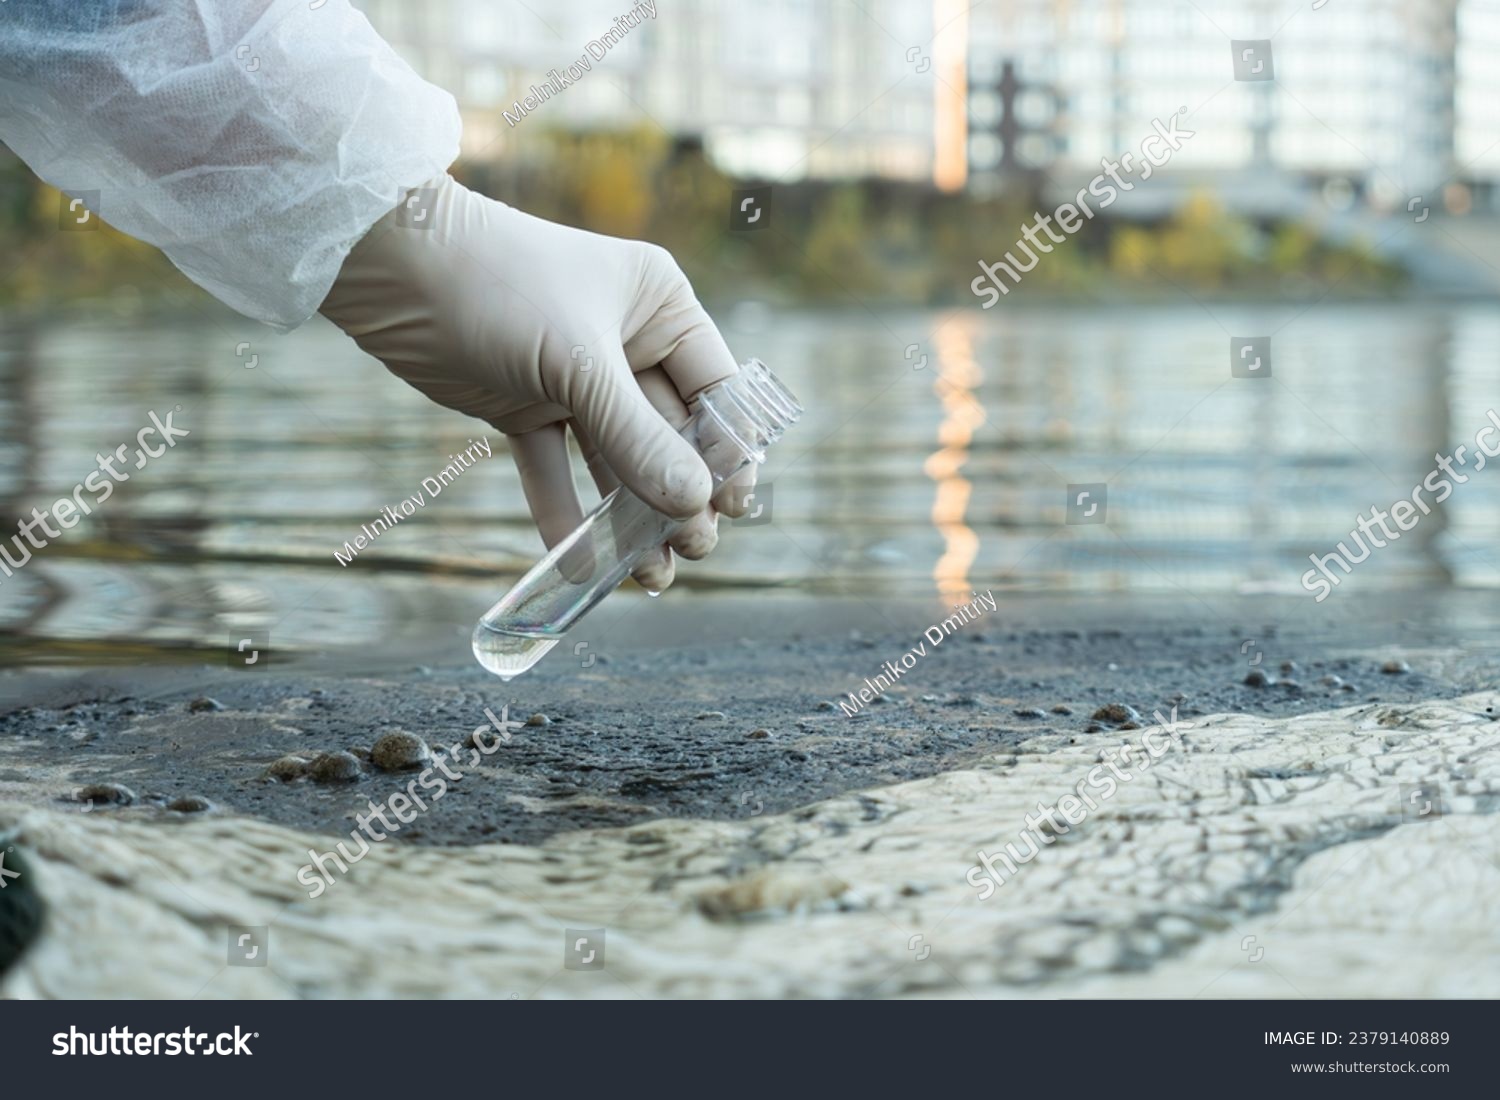 female ecologist in a protective glove holding a test tube with water from a city river #2379140889